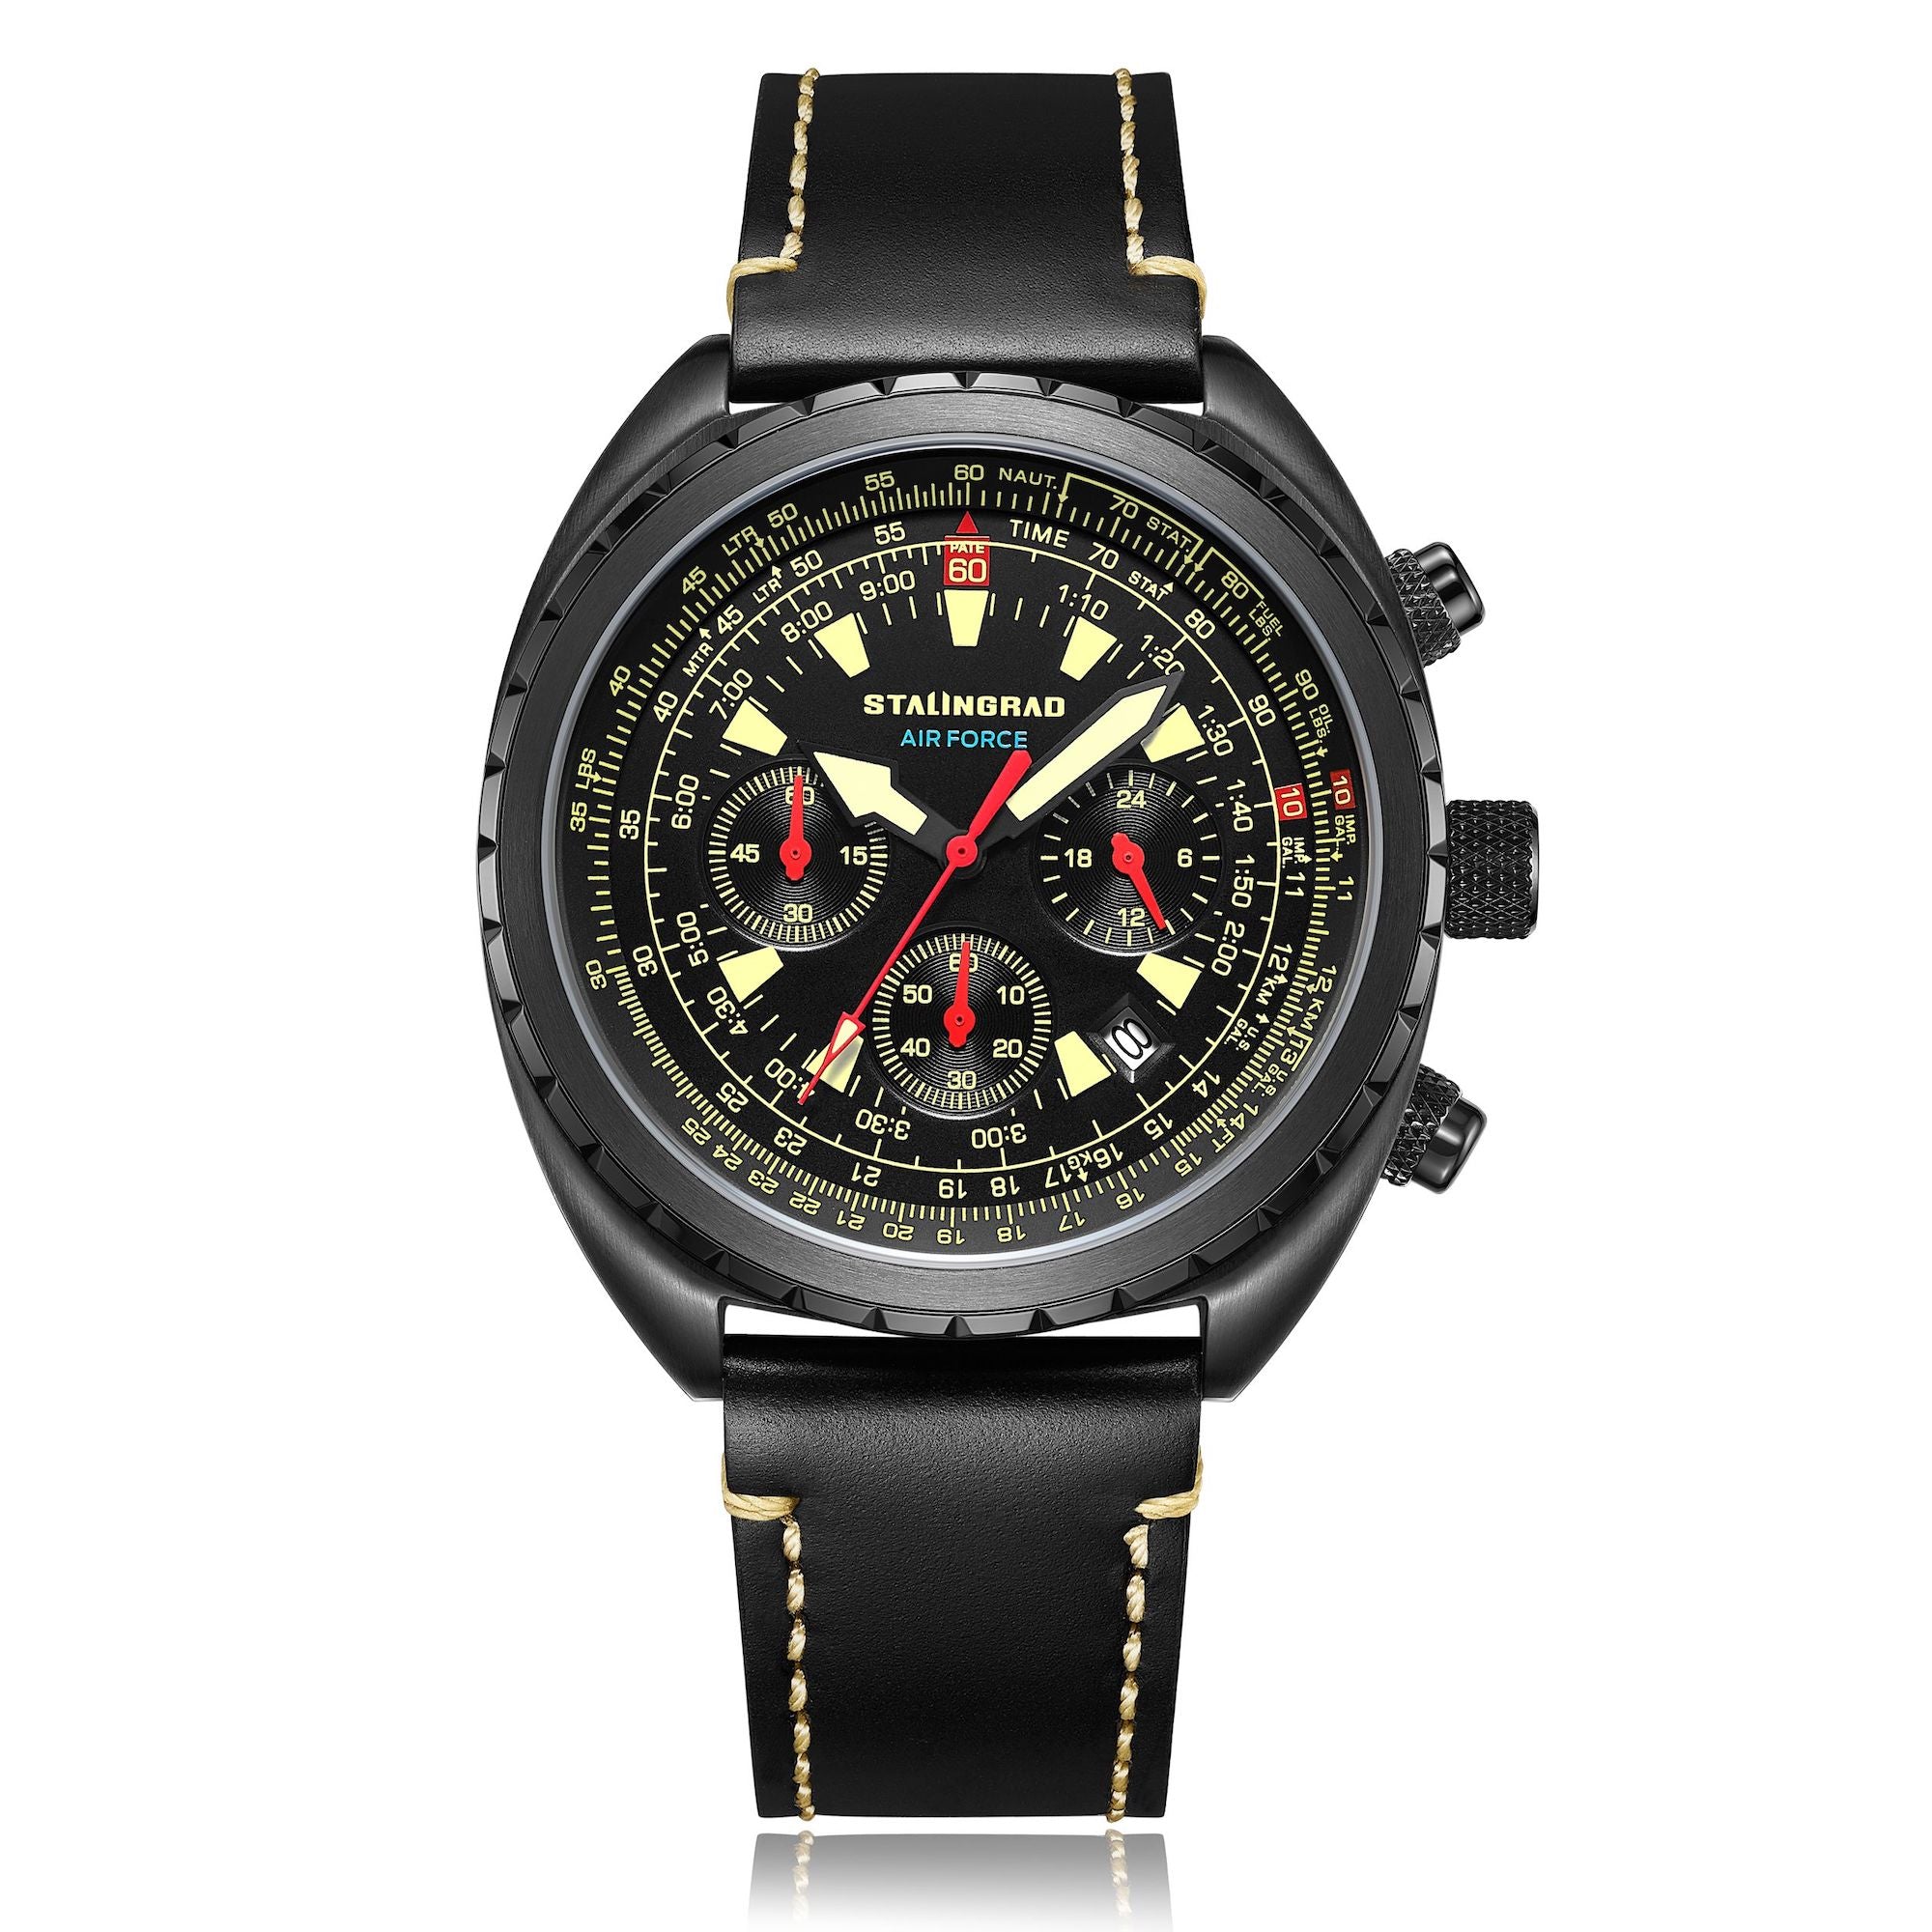 Stalingrad Novikov Chronograph watch with a black dial, black bezel, yellow hour markers and hands with a date window at 4 o'clock on black leather strap front view